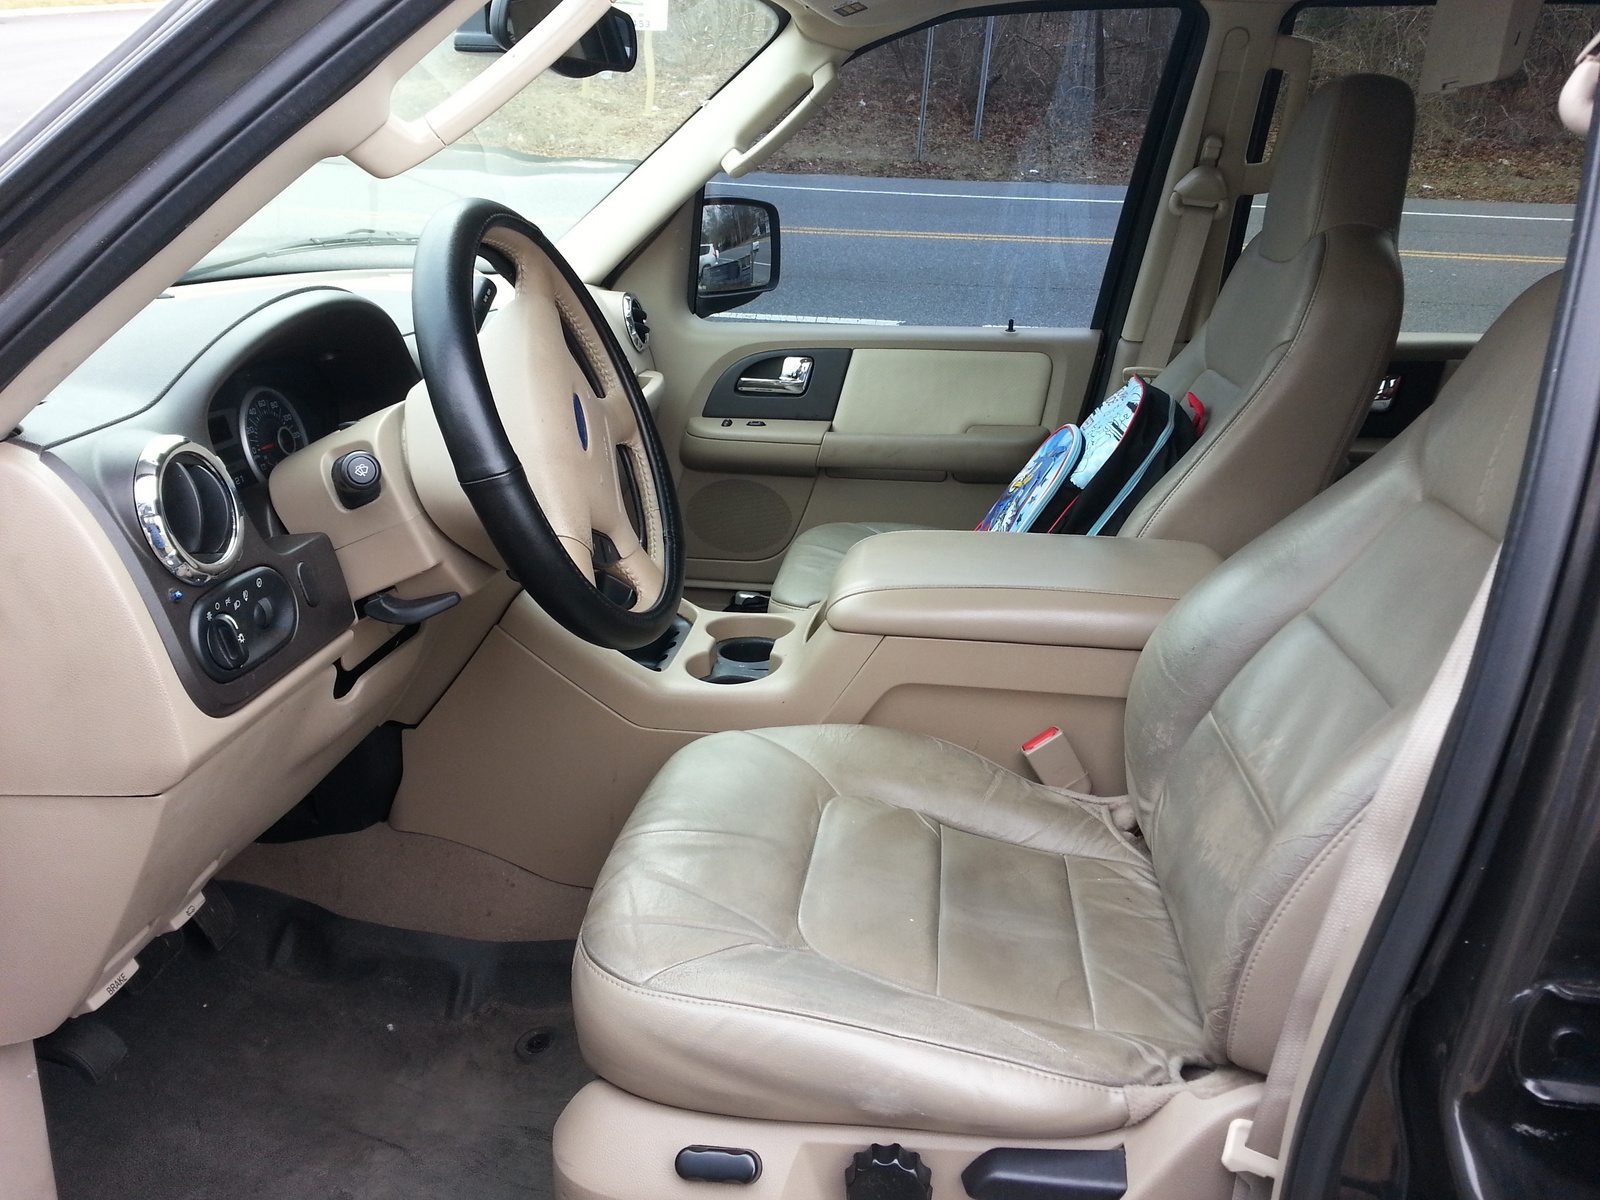 2005 Ford expedition interior pictures #4